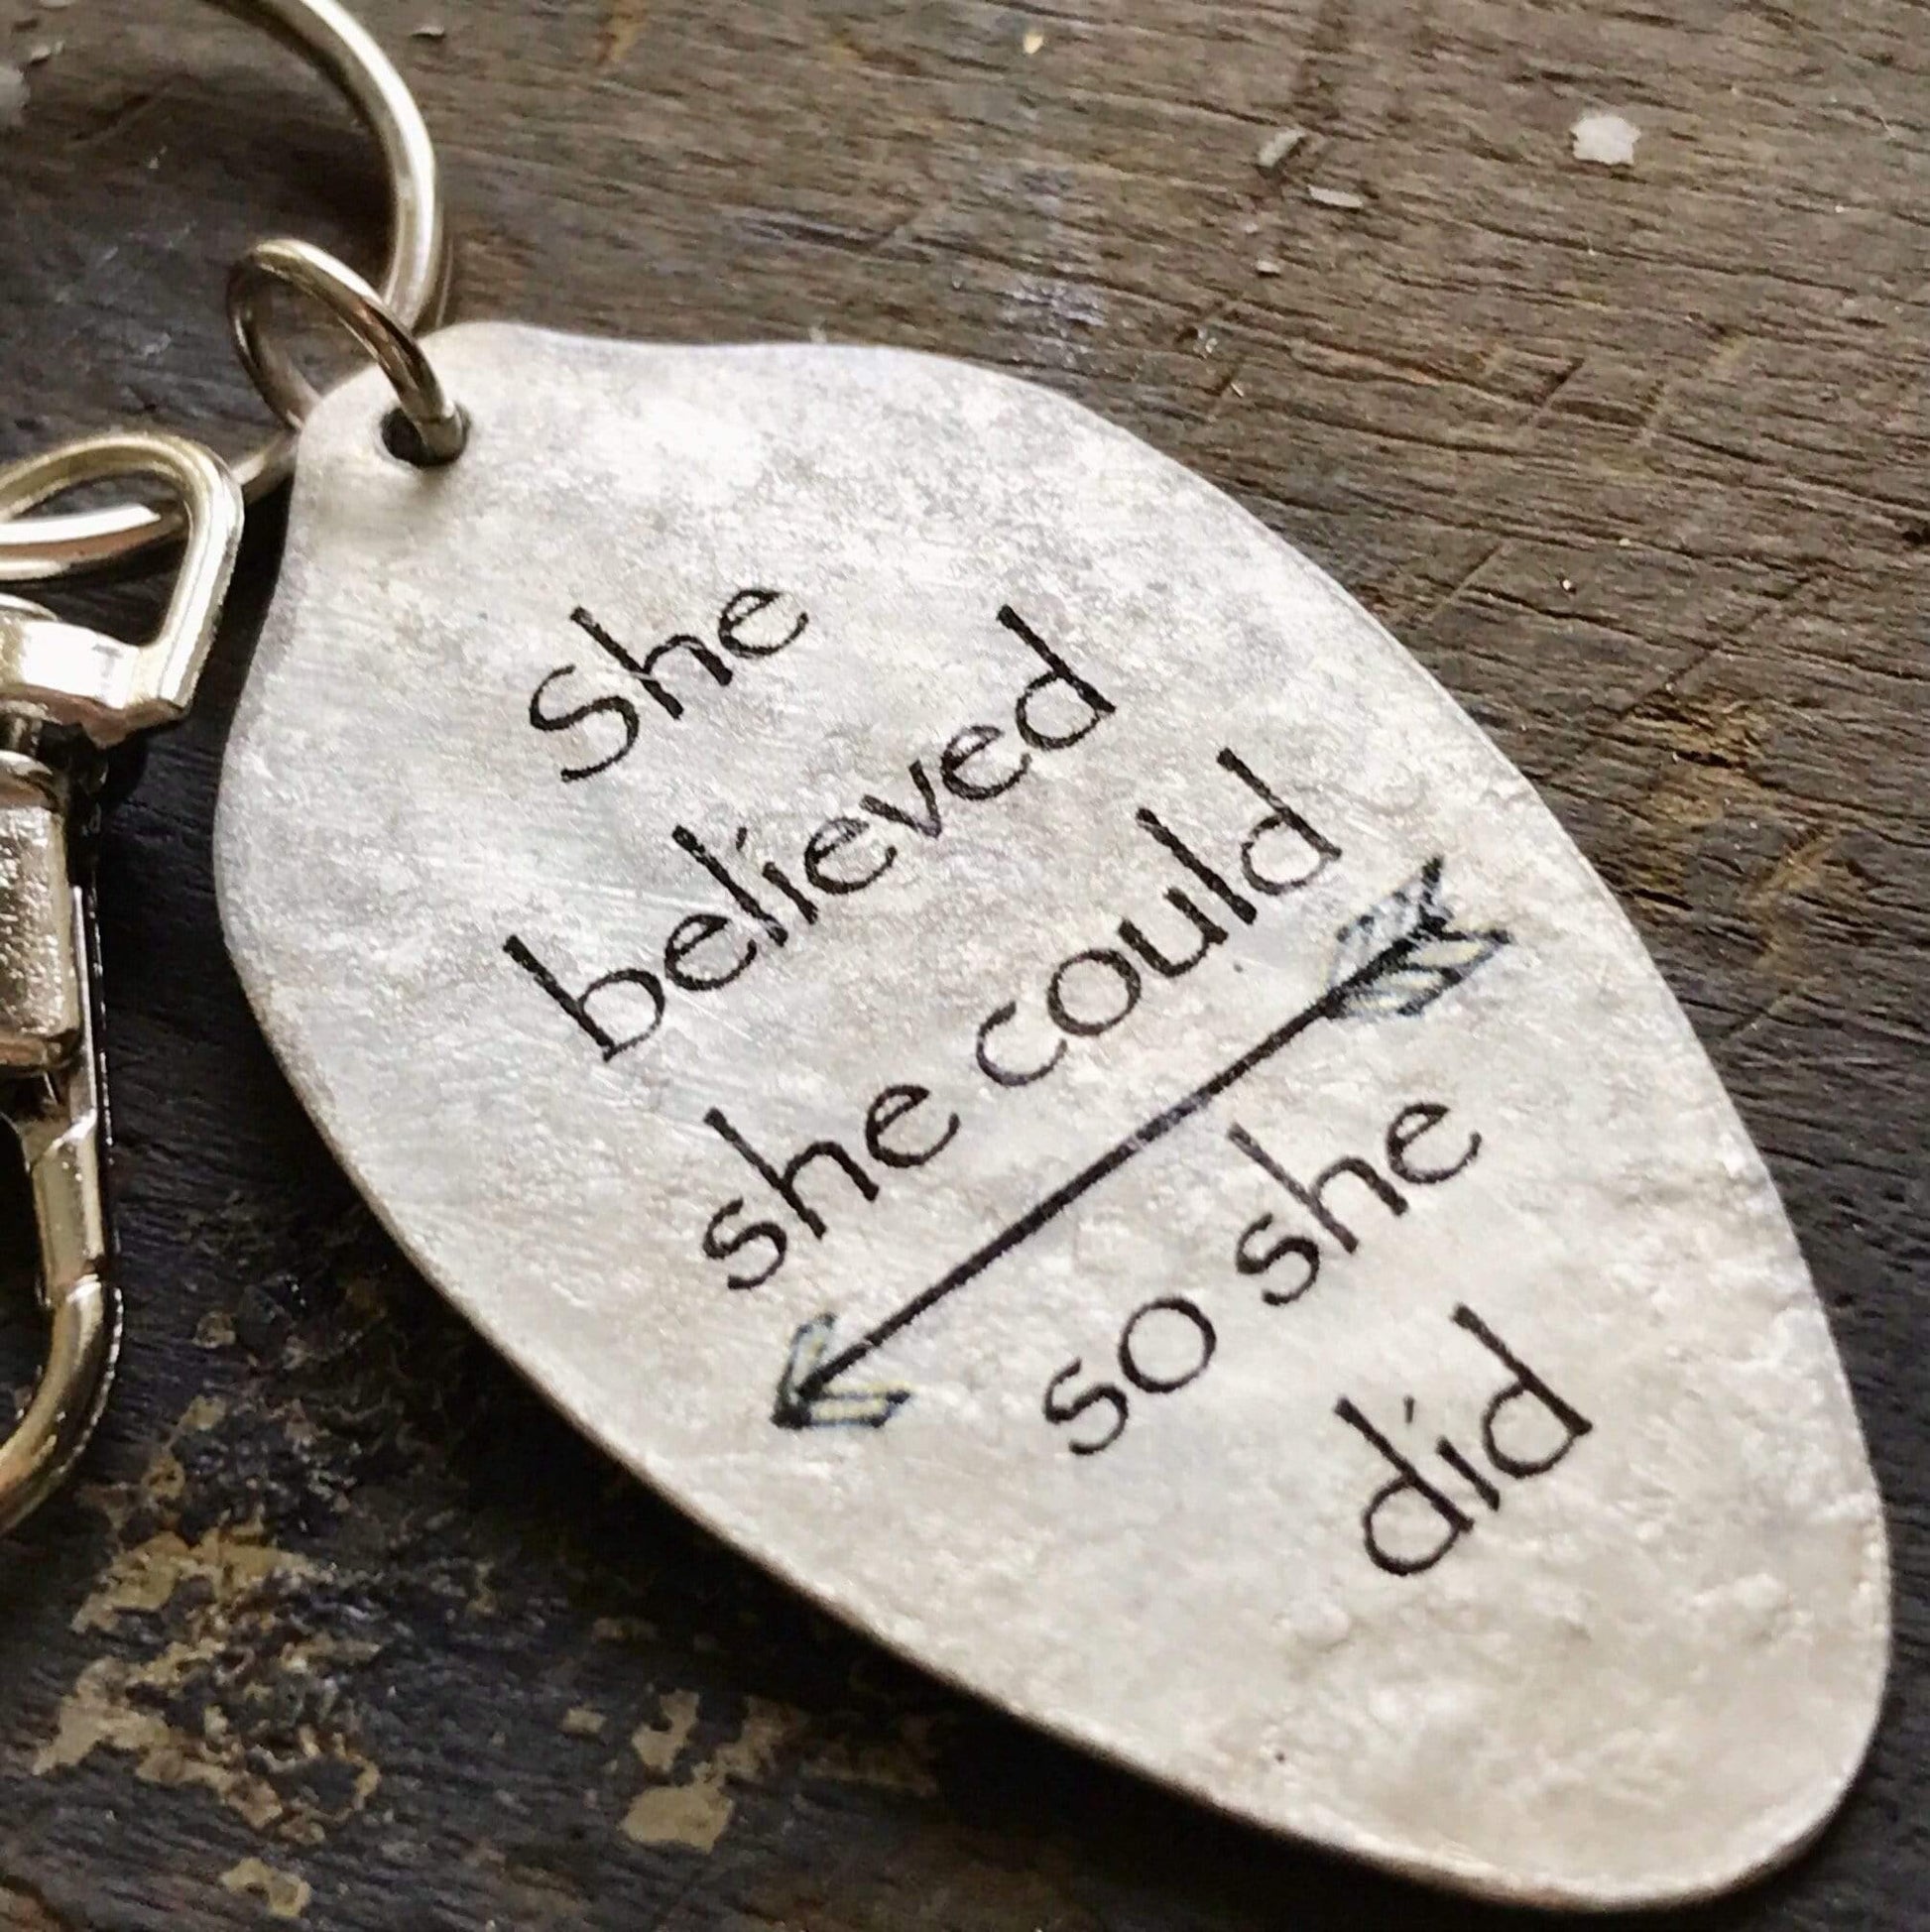 She believed she could keychain kyleemae designs